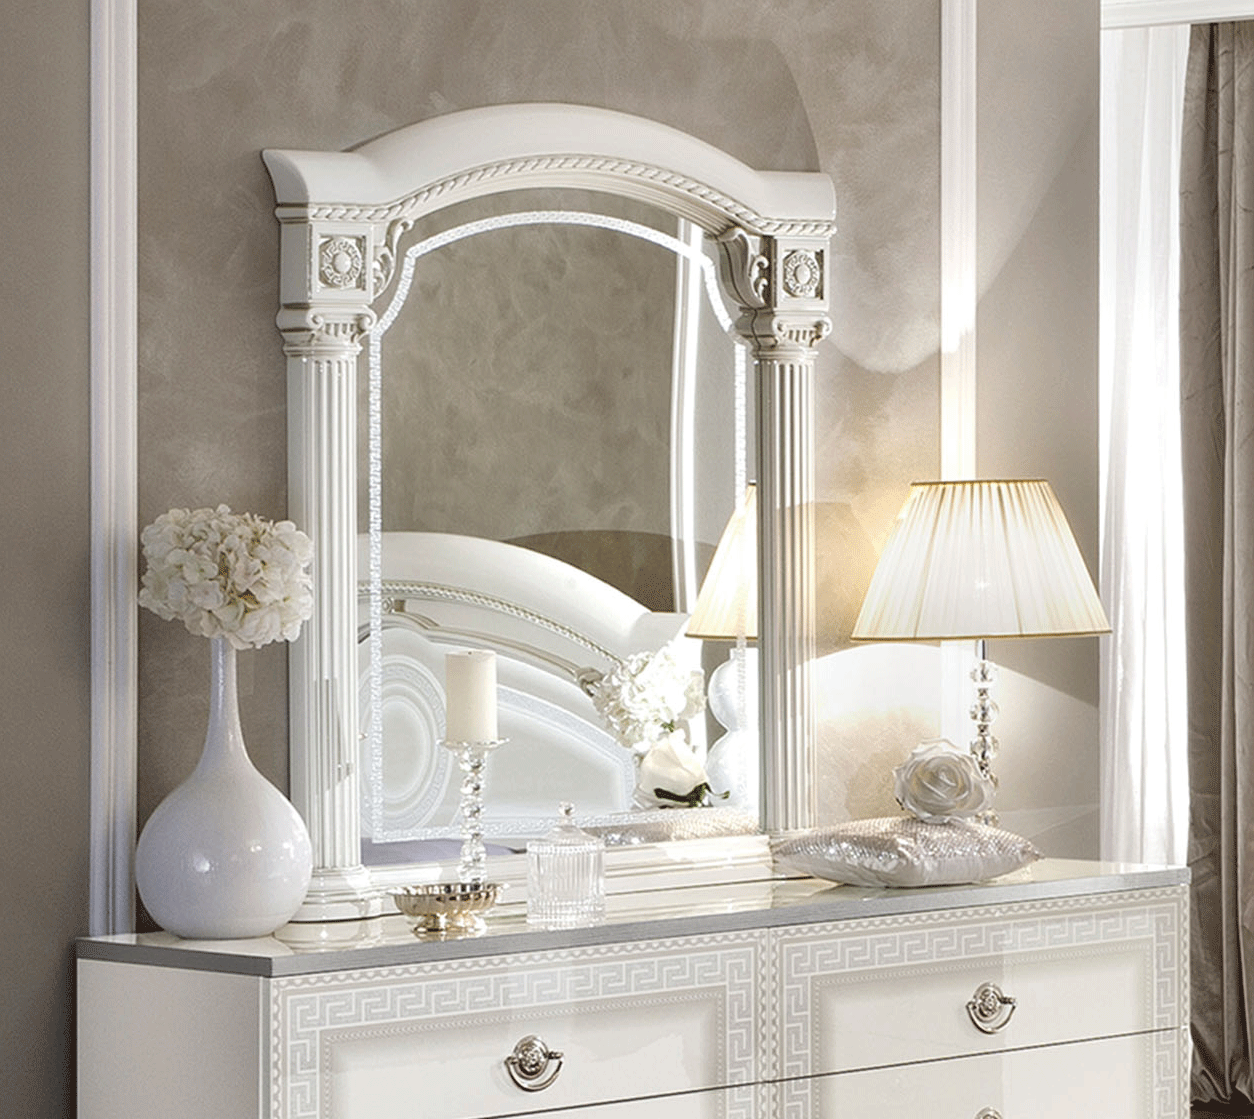 Bedroom Furniture Beds Aida White/Silver mirror